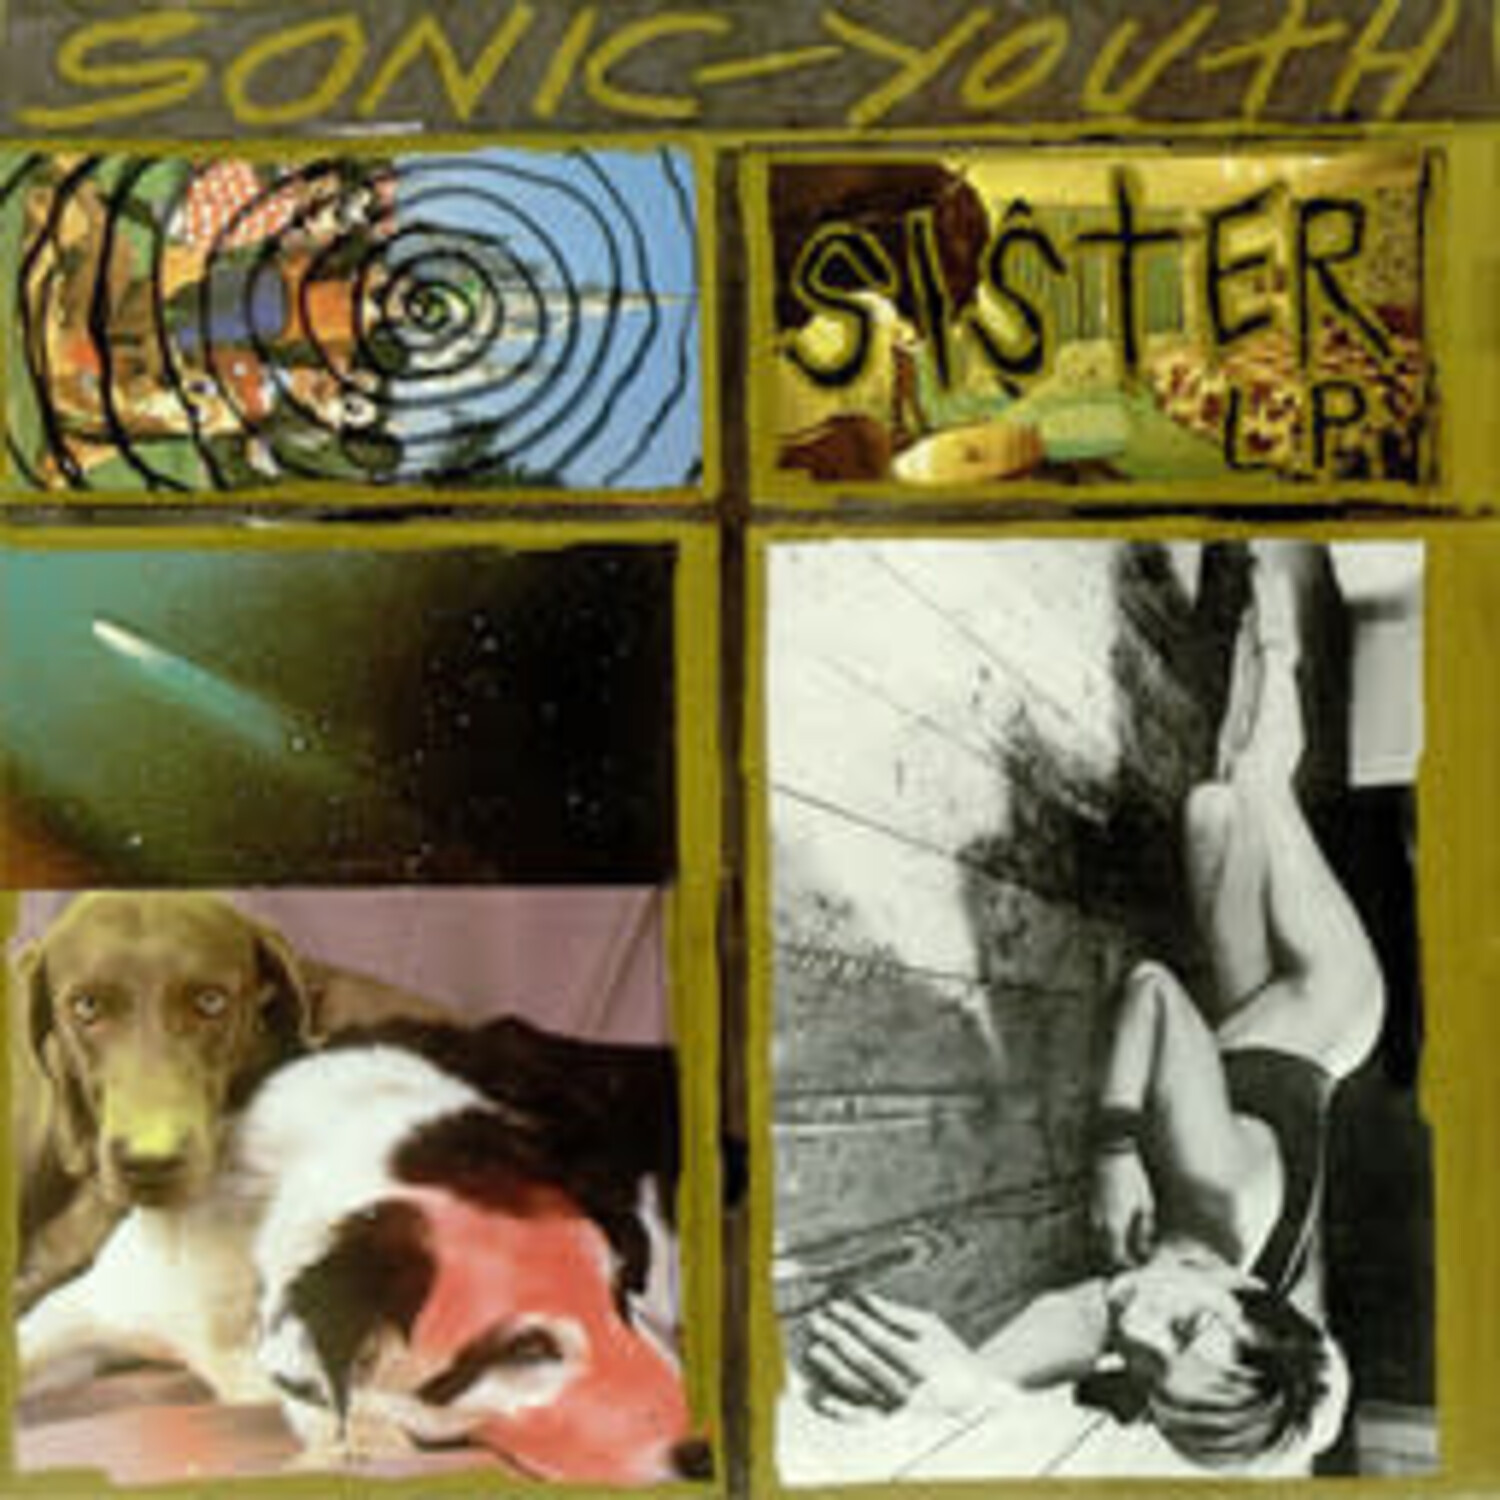 Sonic Youth - Sister LP - Wax Trax Records